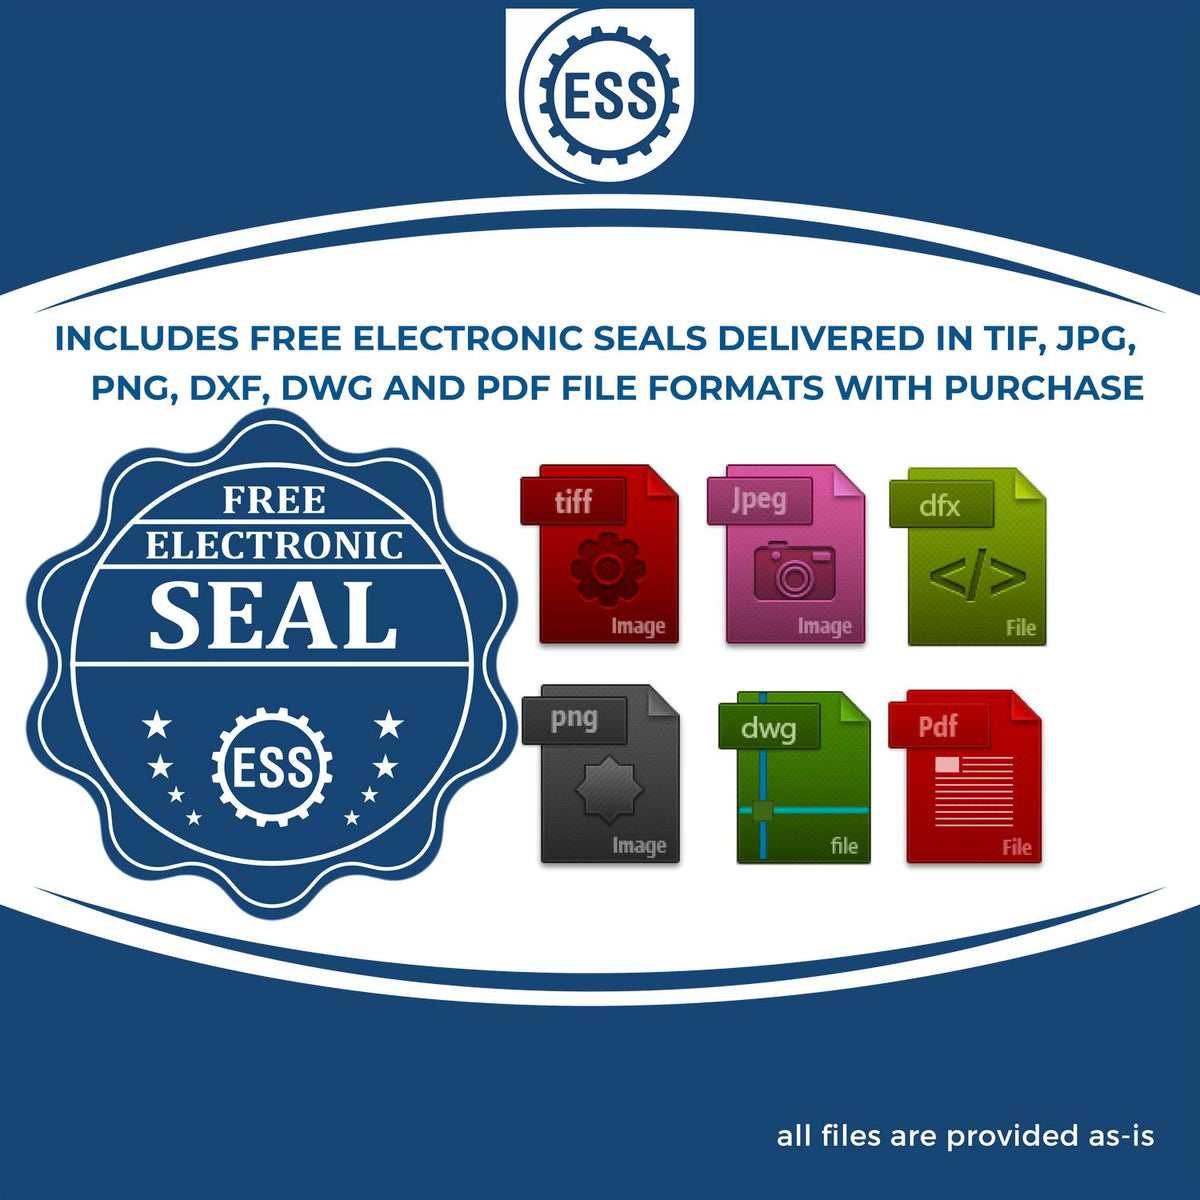 An infographic for the free electronic seal for the Gift South Carolina Landscape Architect Seal illustrating the different file type icons such as DXF, DWG, TIF, JPG and PNG.